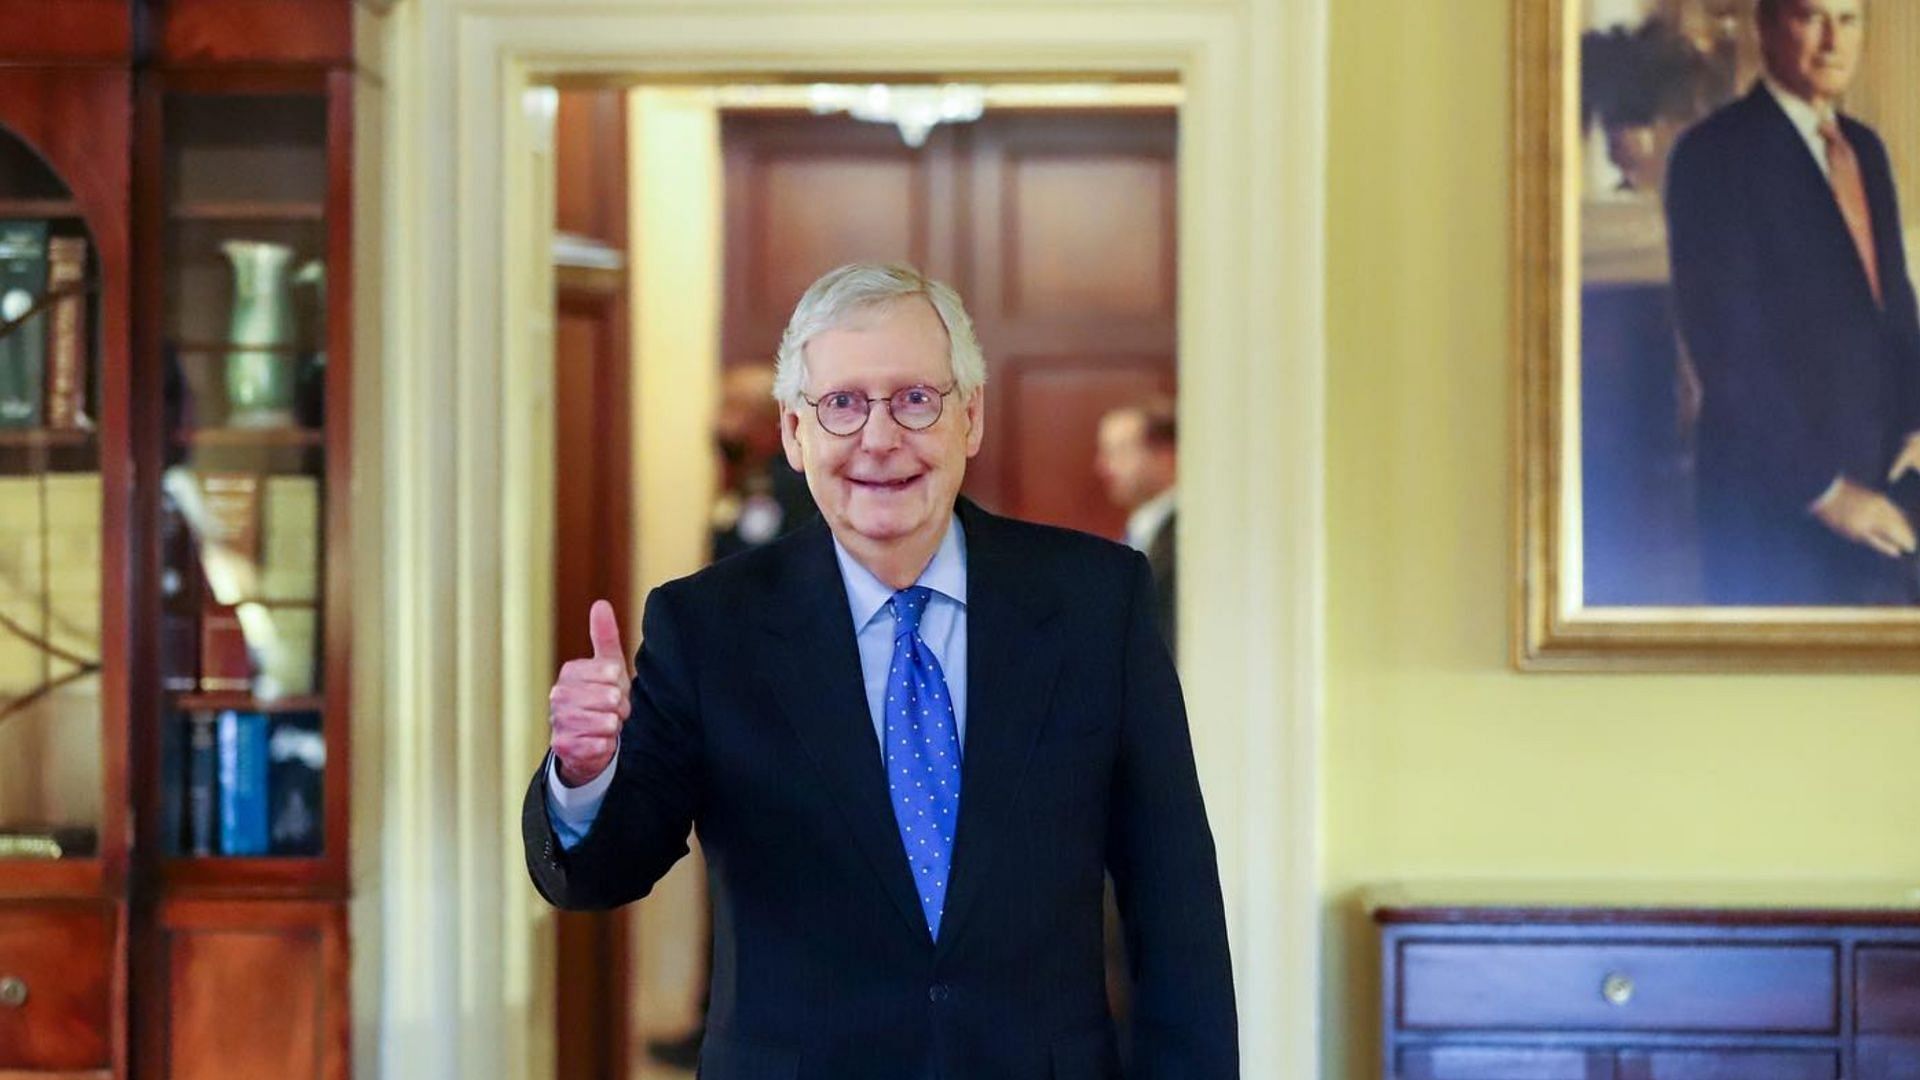 McConnell announced that he would be stepping down as the Republican leader of the Senate (Image via Instagram/@leadermcconnell)